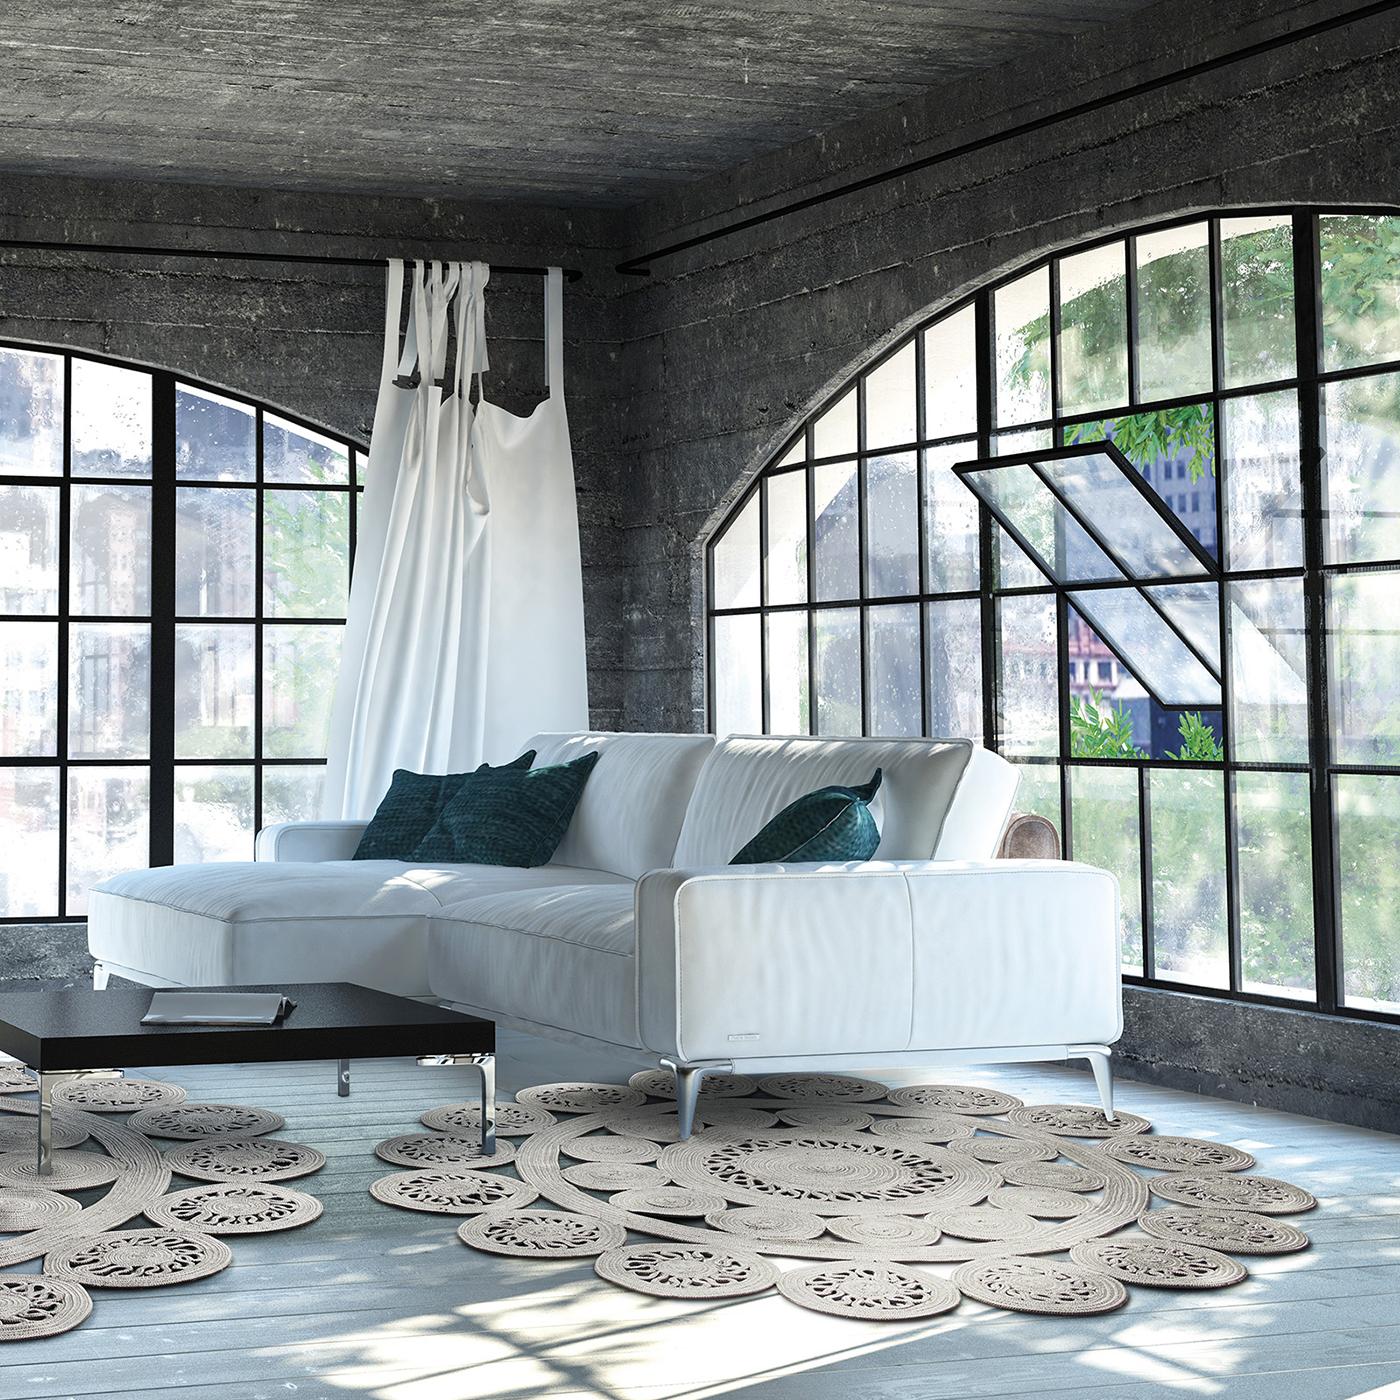 A modern rug handmade in nautical rope, the Alyssa 2B features a juxtaposition of solid and perforated shapes that turn into a lace pattern when laid on the floor. In silver, the rug is a contemporary twist on timeless styles, perfect for both